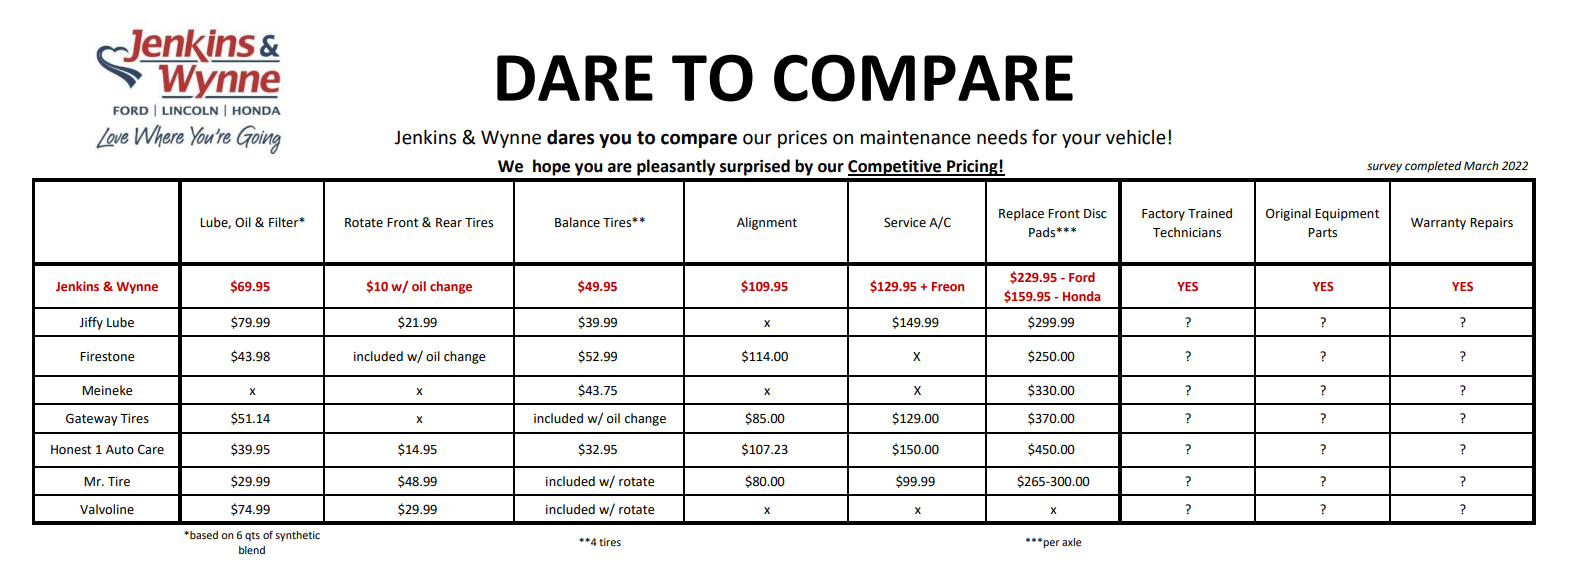 Dare to compare | Price comparision chart | Jenkins and Wynne Ford in Clarksville TN